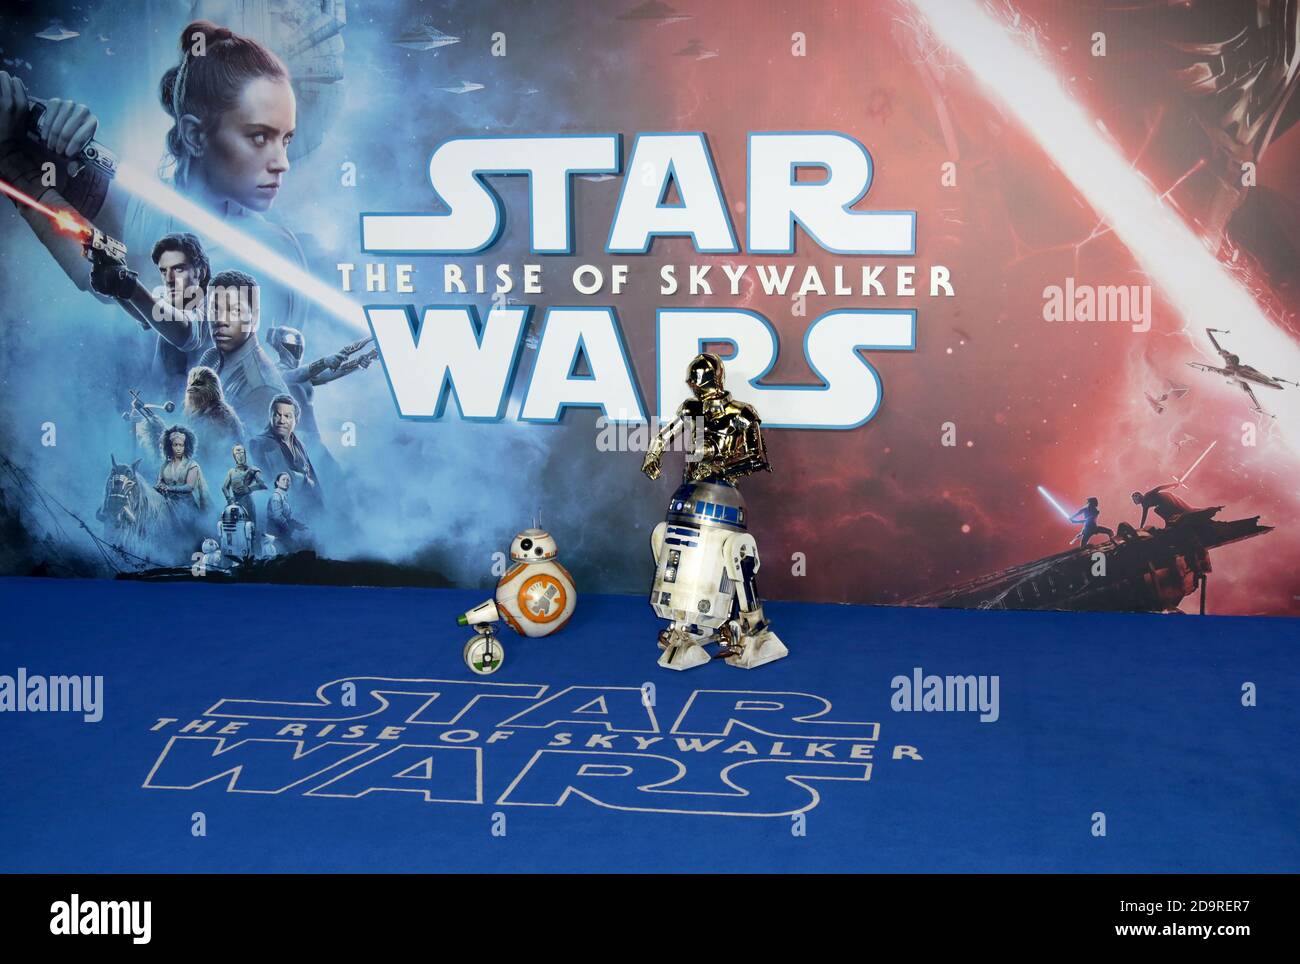 Dec 18, 2019 - London, England, UK - Star Wars: The Rise of Skywalker UK Premiere, Cineworld, Leicester Square - Red Carpet Arrivals Photo Shows: Rich Stock Photo